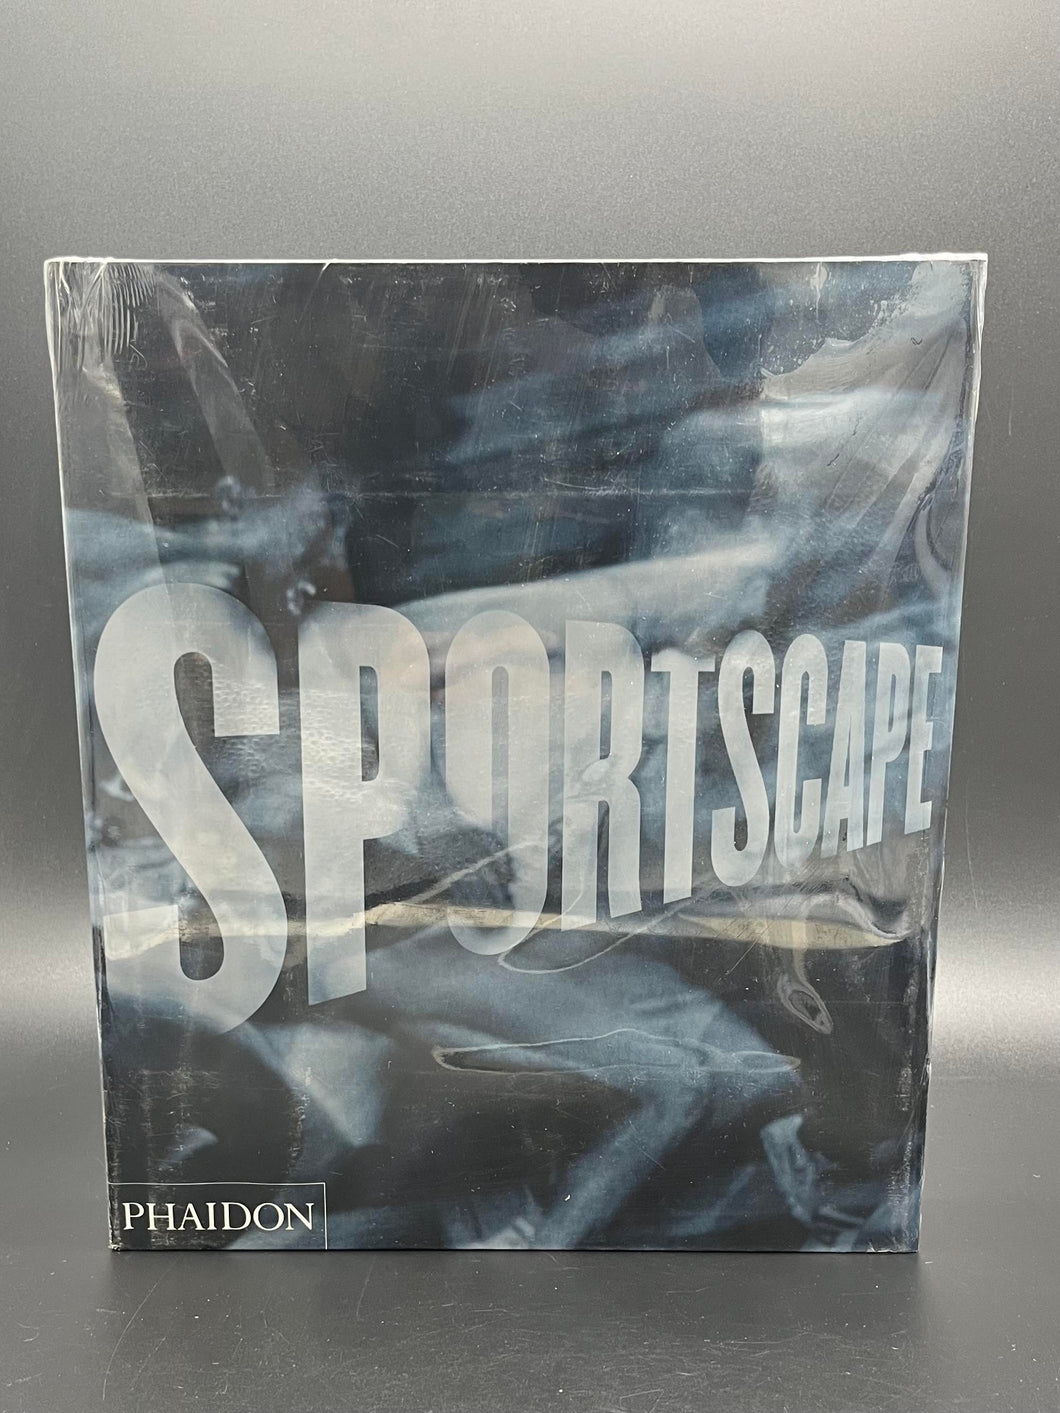 Sportscape - The Evolution of Sports Photograph Hardcover Book - Sealed